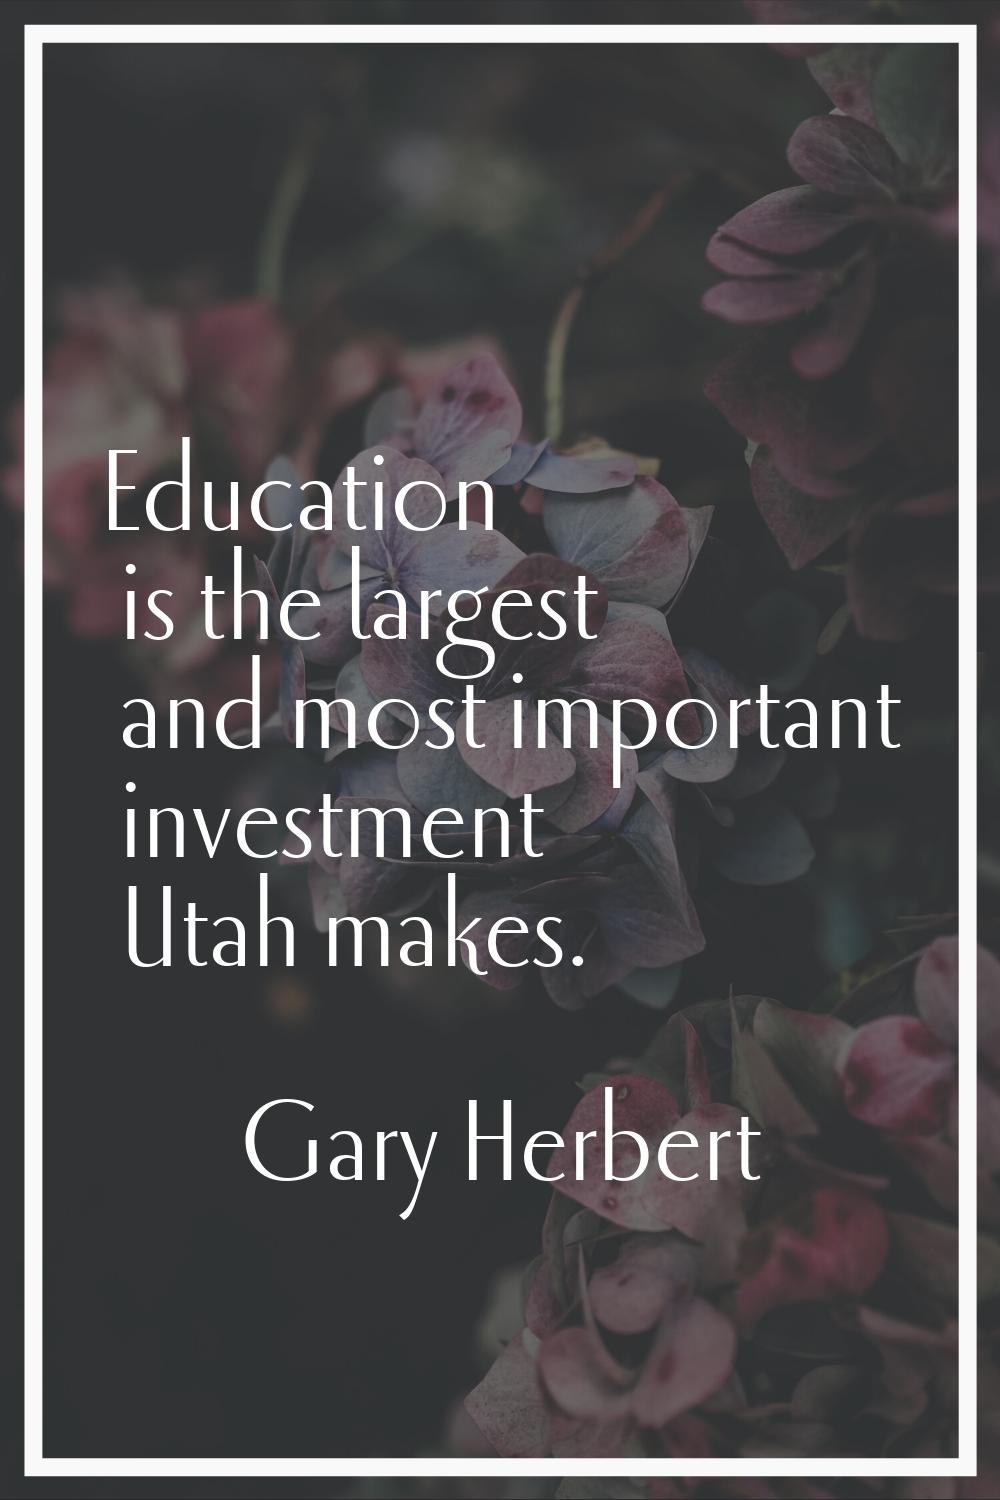 Education is the largest and most important investment Utah makes.